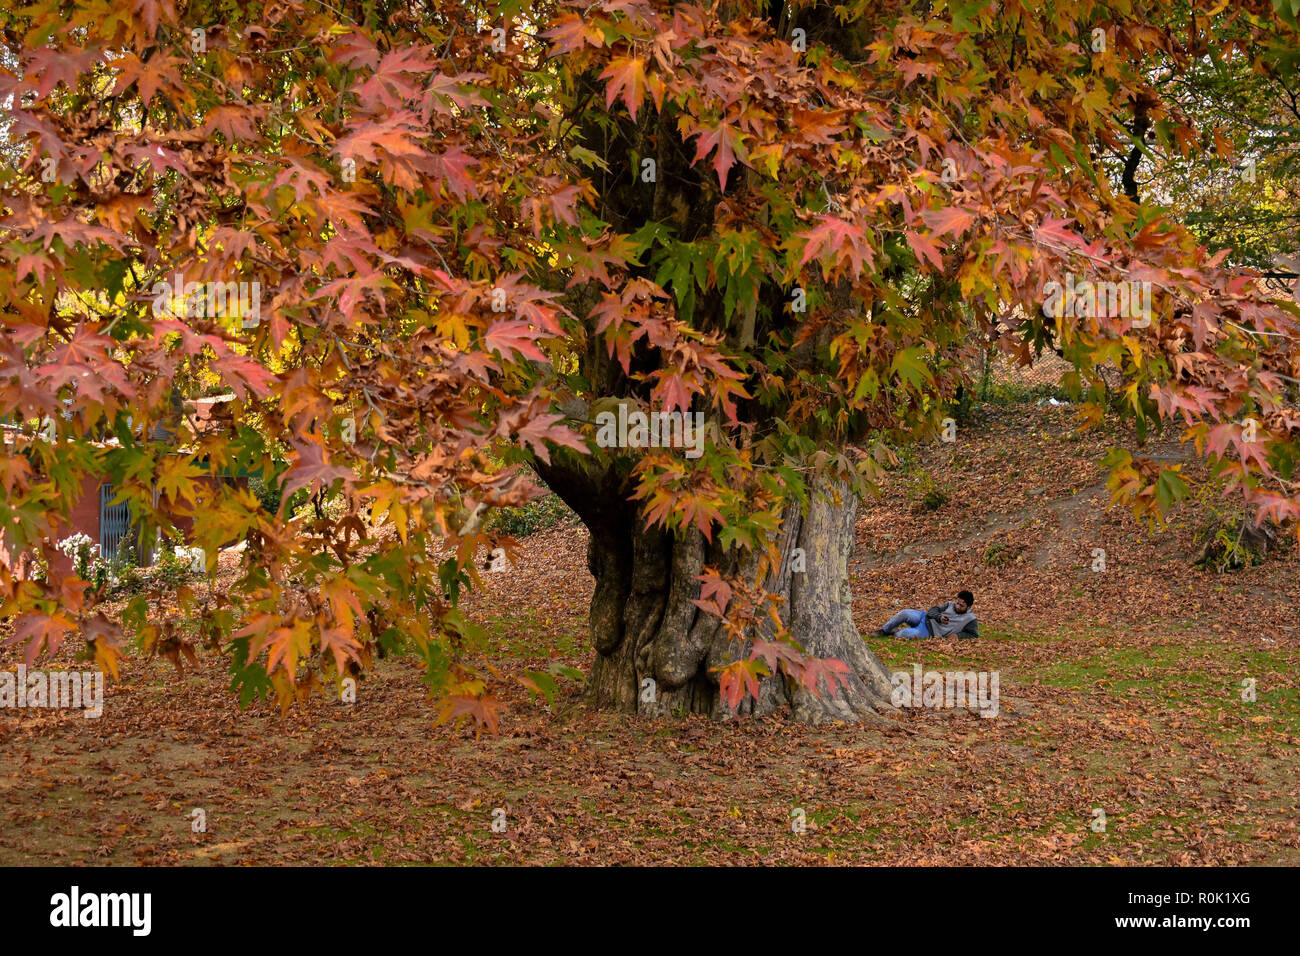 A man seen relaxing beneath a chinar tree during the autumn season . Autumn, locally known as Harud, is a season of harvesting in Kashmir with trees changing their colours while the days become shorter as winter approaches in Kashmir. Stock Photo